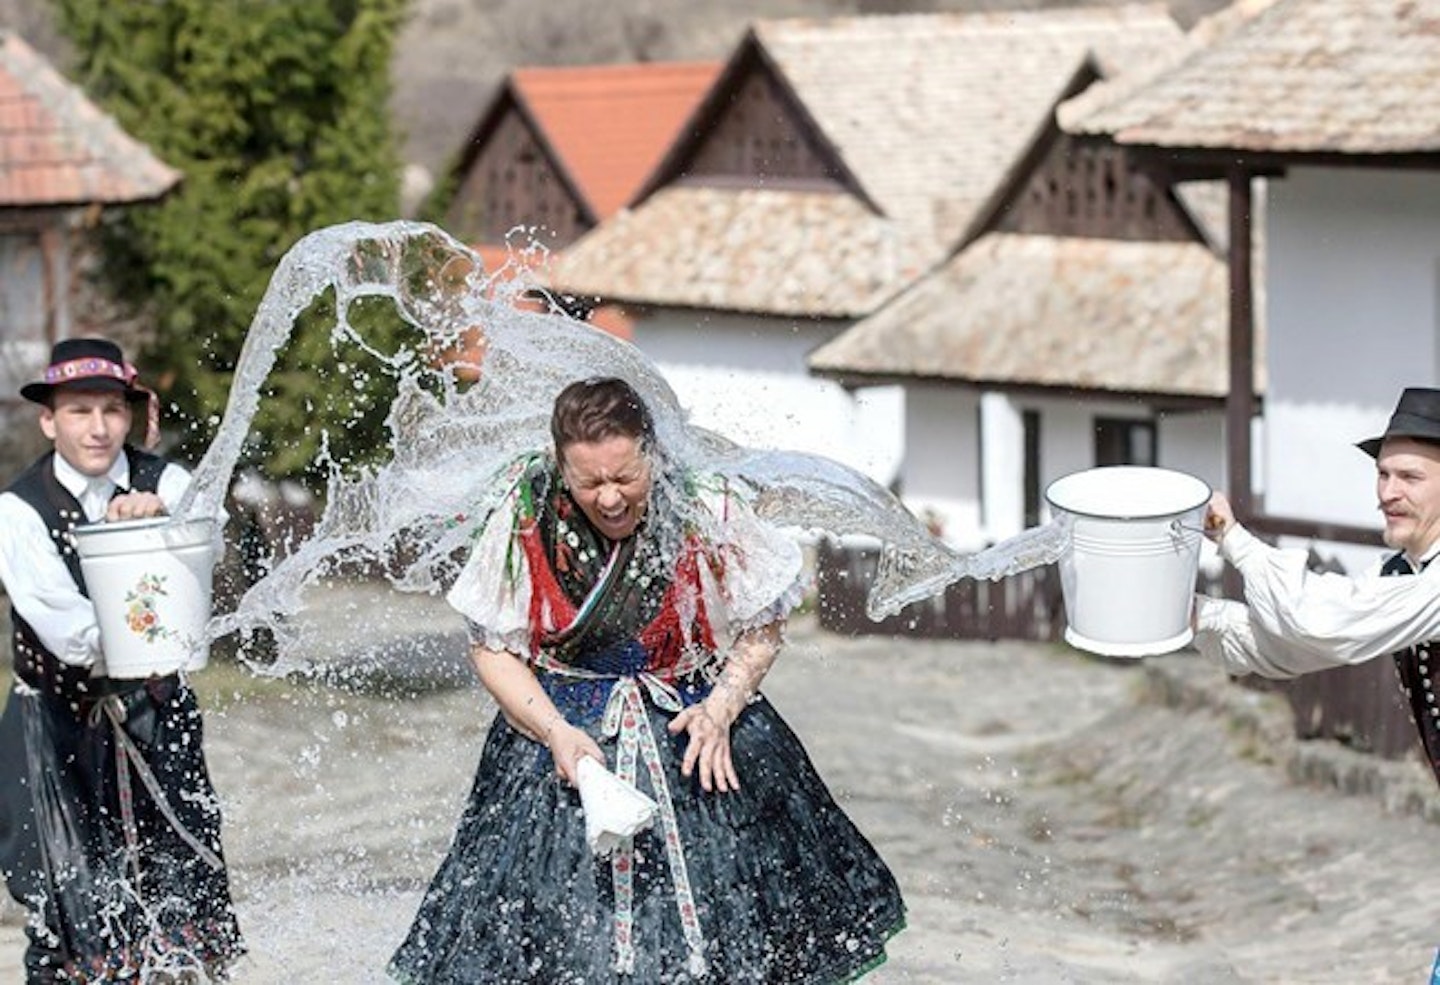 Woman being splashed with water